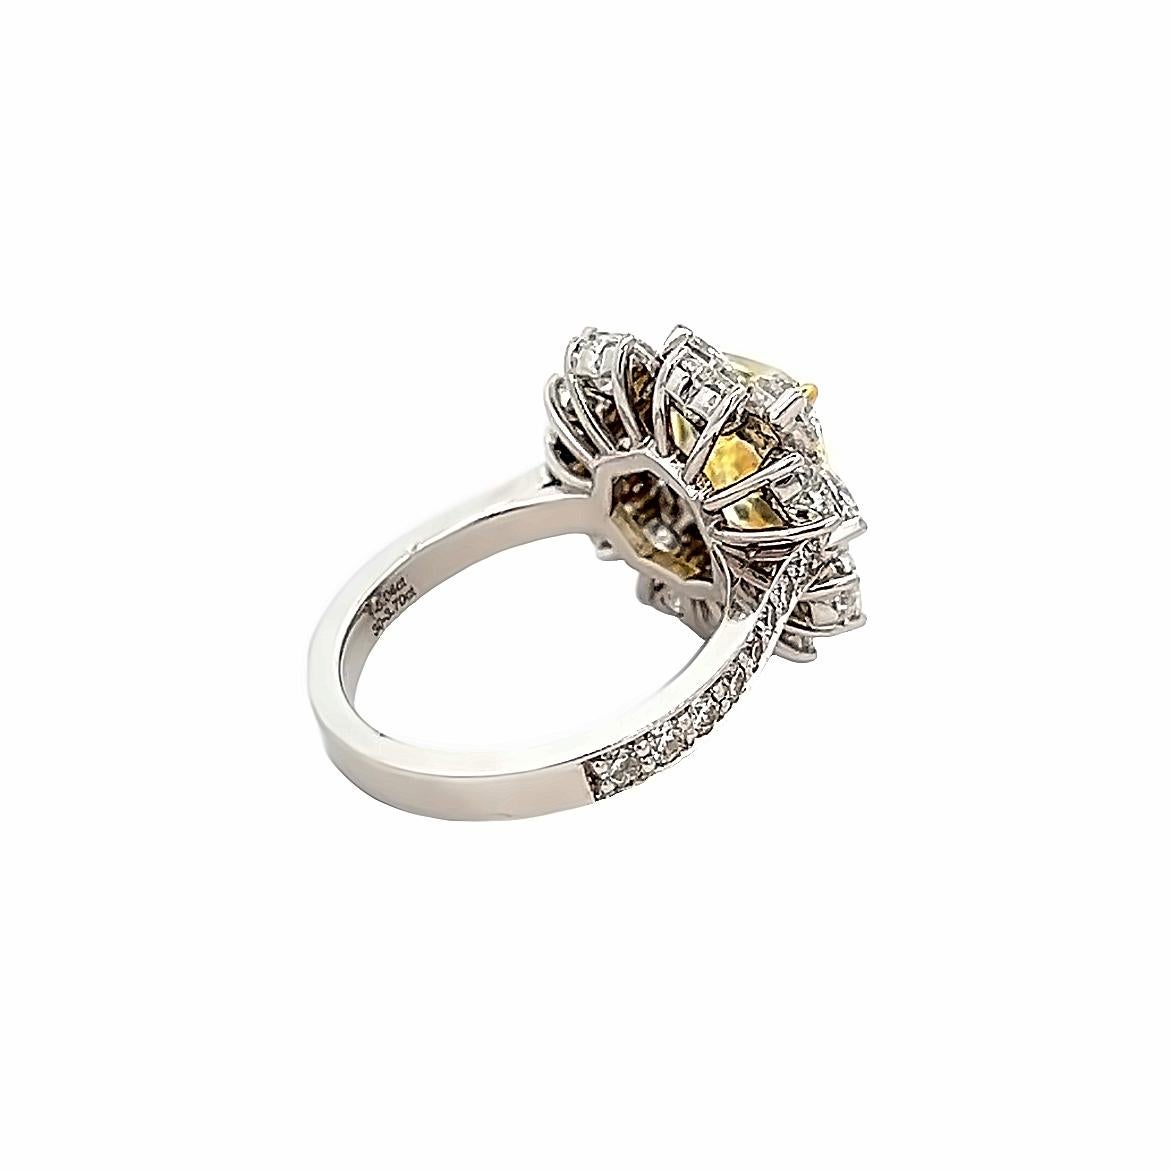 7.33CT Total Weight Cushion Modified Brilliant Natural Fancy Yellow Even Ring Neuf - En vente à New York, NY